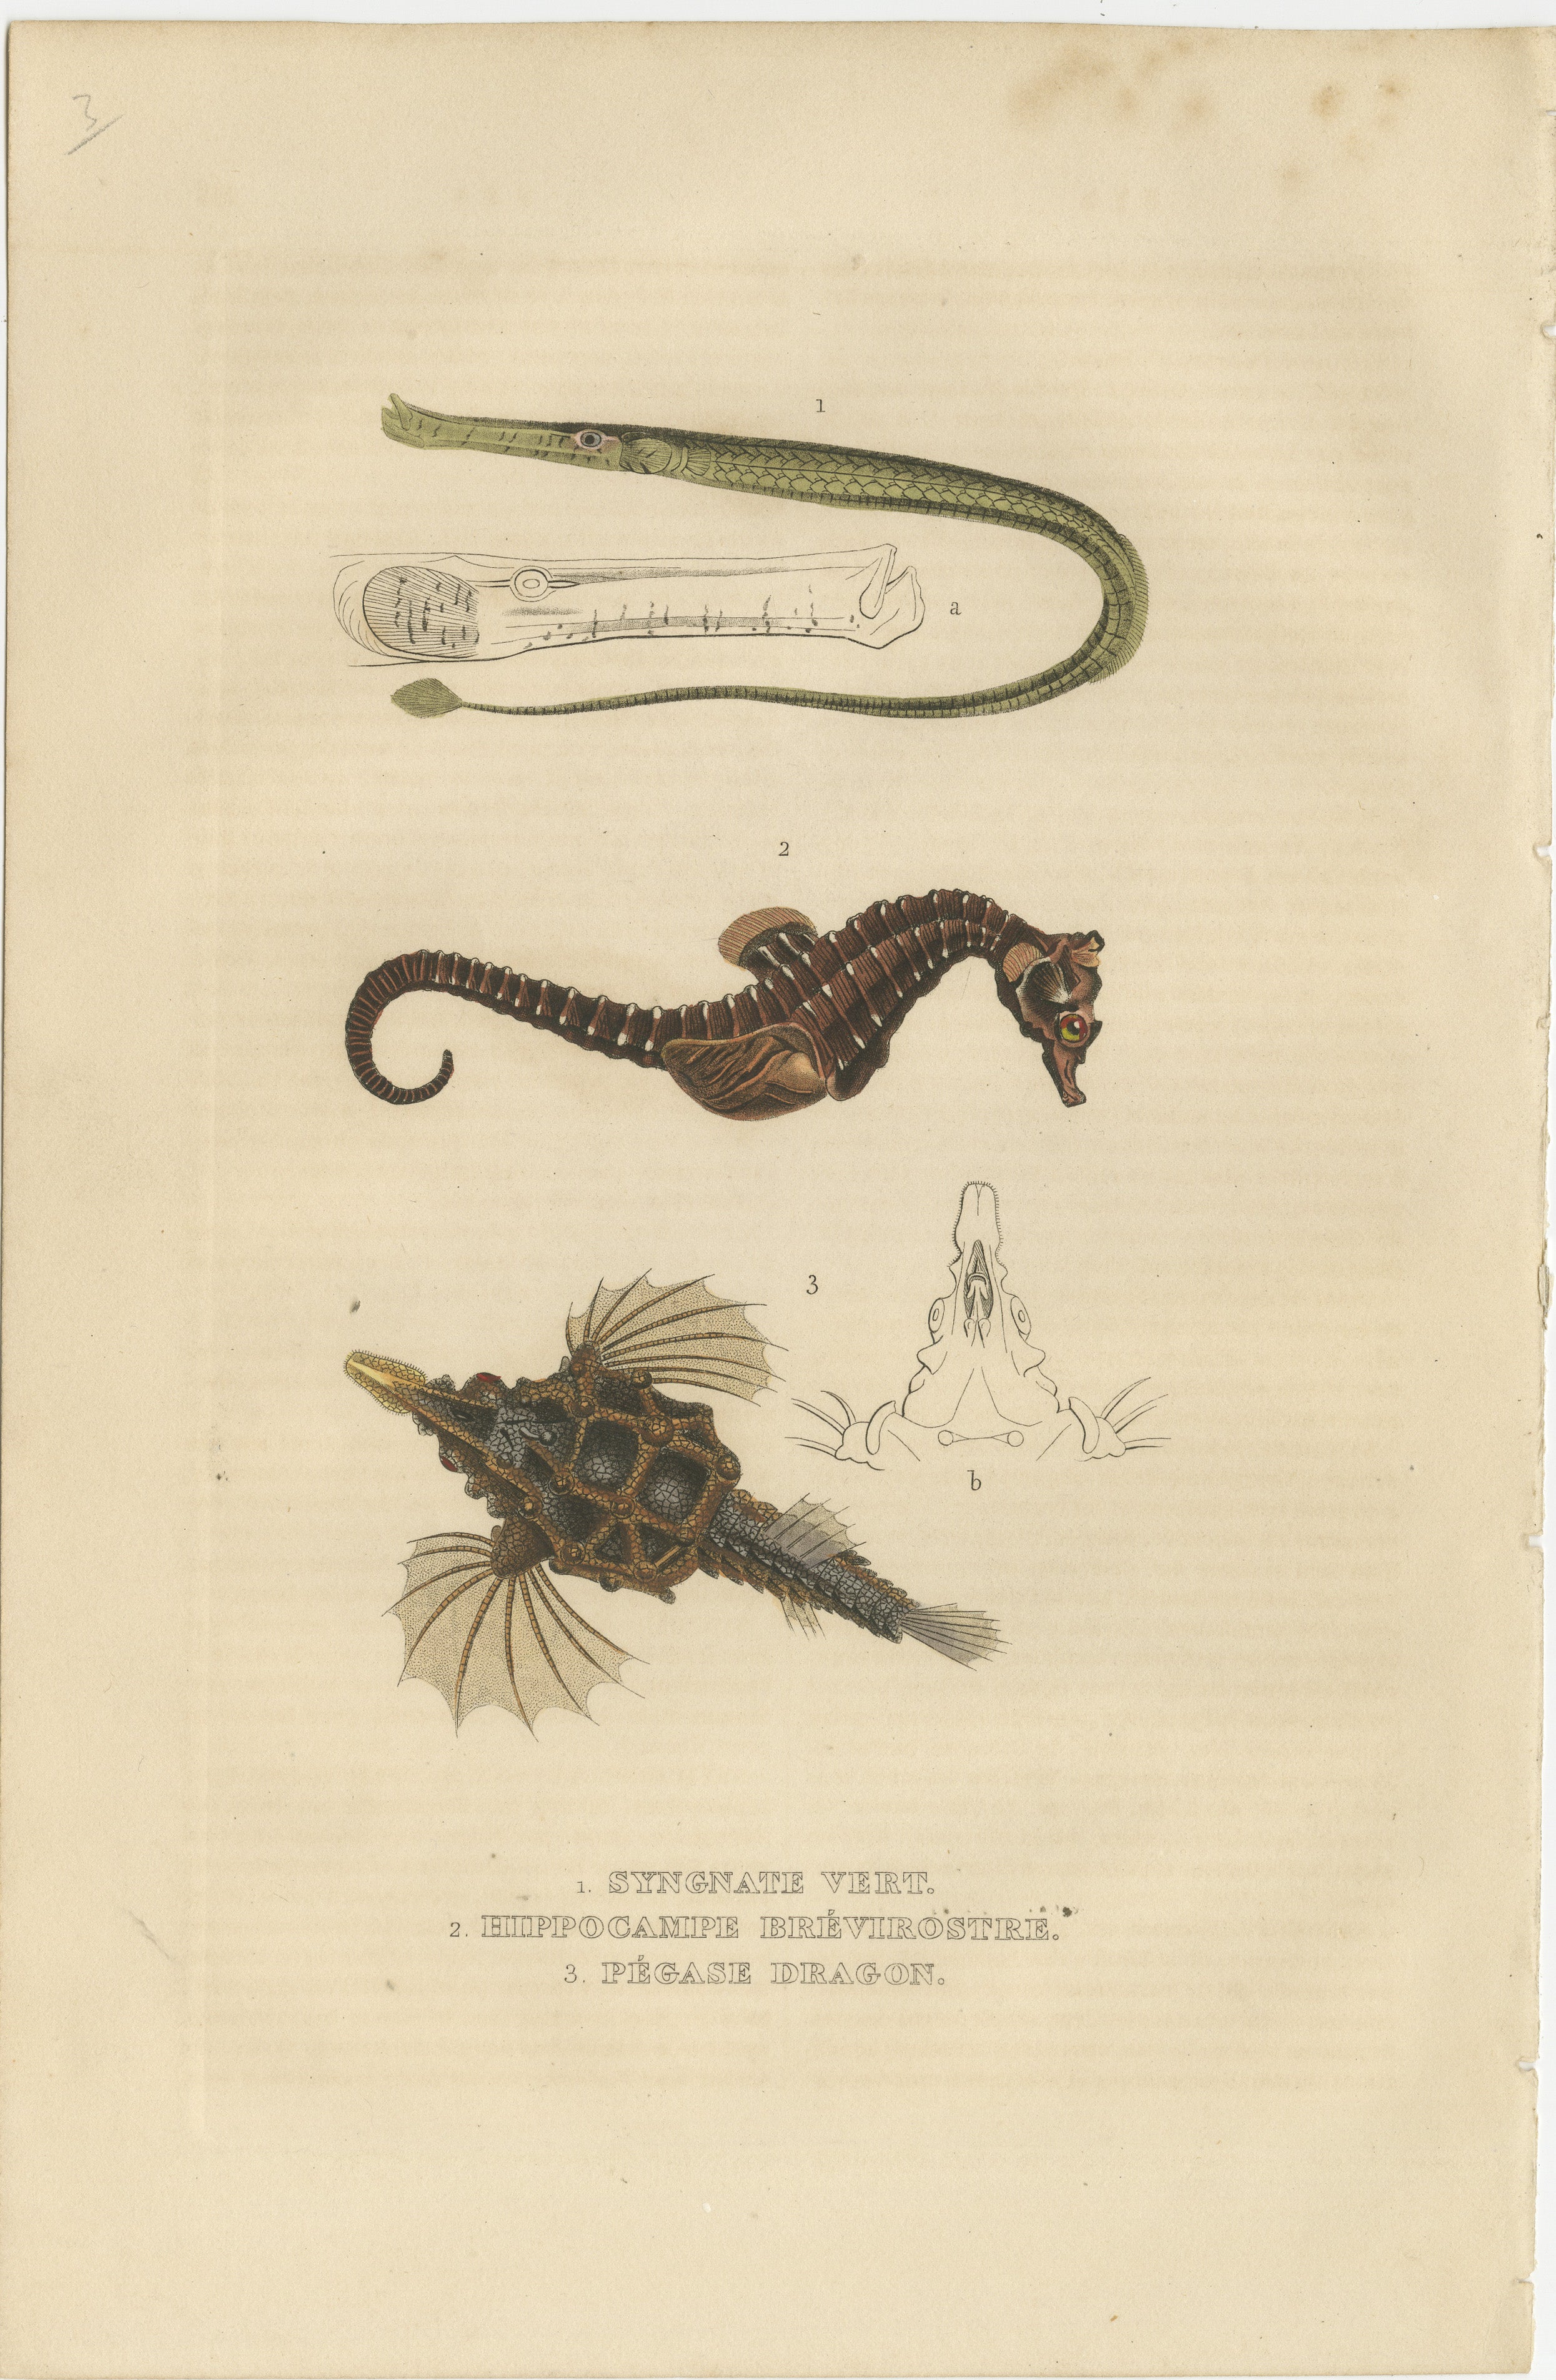 Here's a brief description of the animals mentioned on the orginal hand-colored antique print:

This antique print features marine creatures that present a captivating depiction of each species, highlighting their distinctive characteristics:

1.